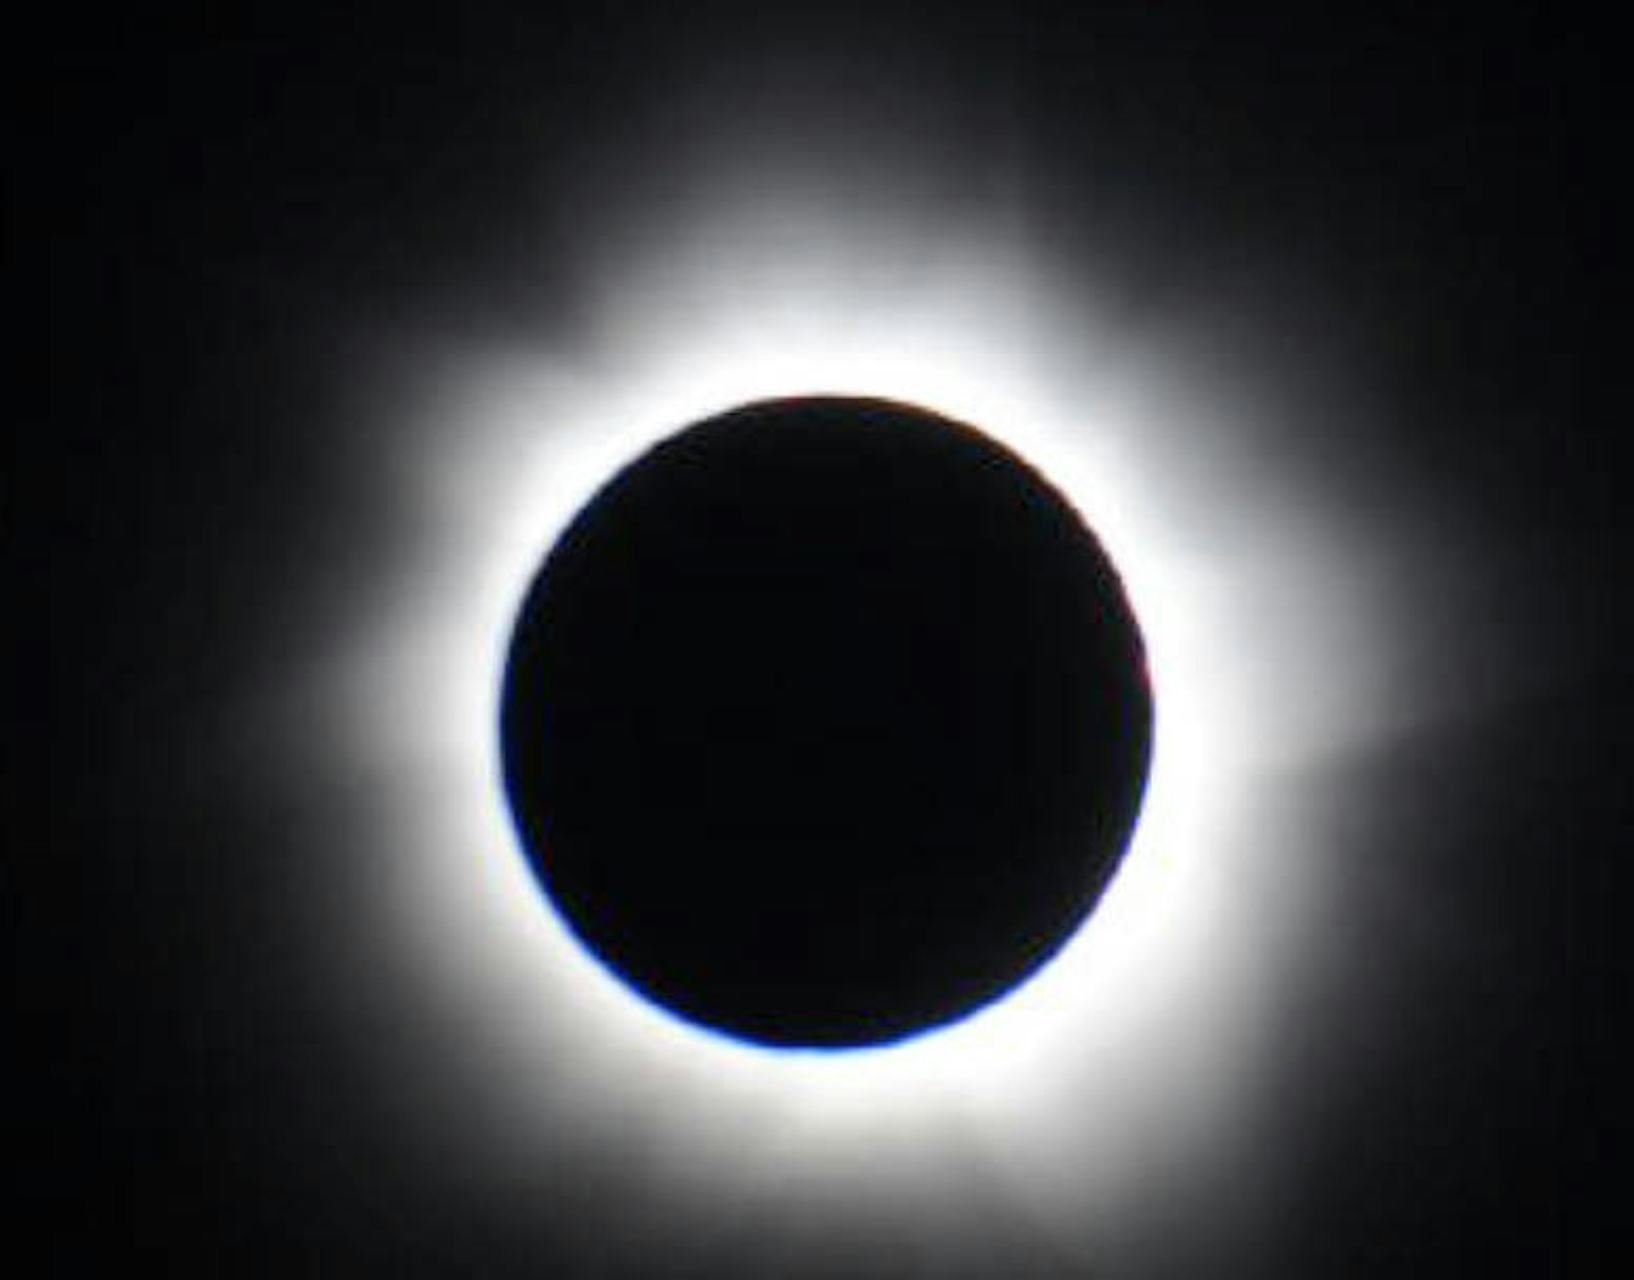 When Was the Last Total Solar Eclipse in the USA? It's Been a Bit